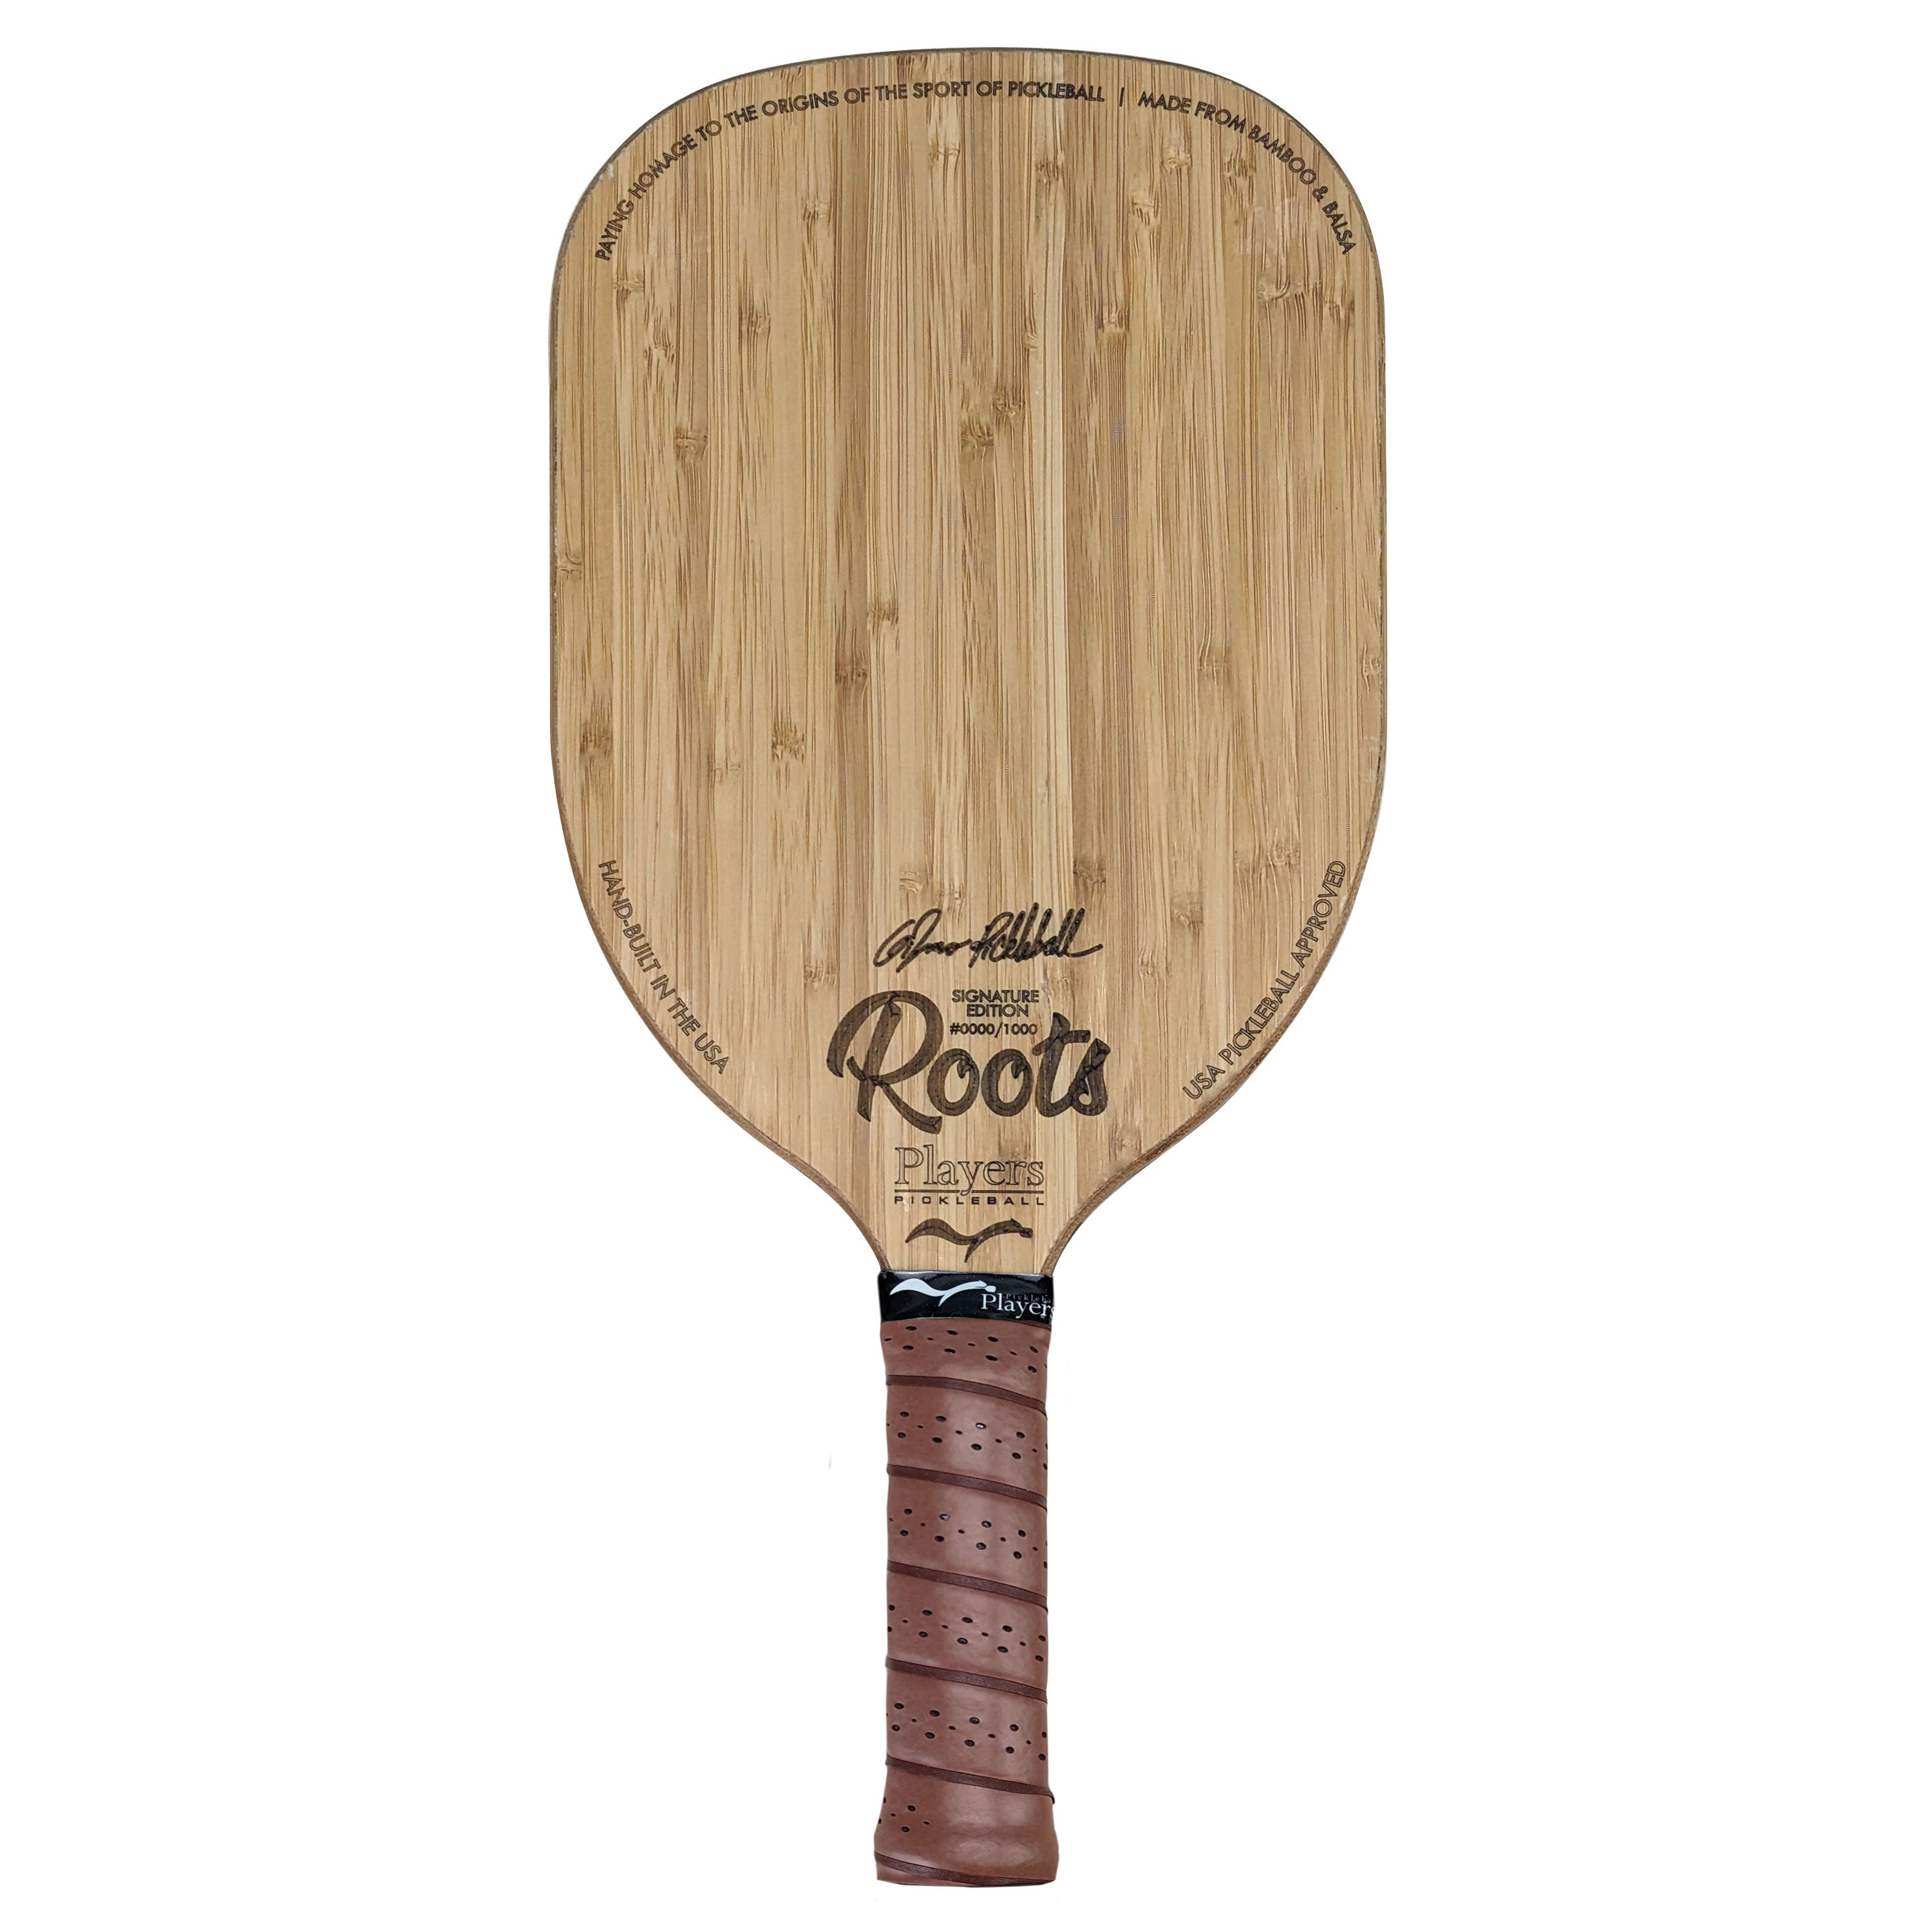 Roots: Limited Edition Signature Paddle Pre-Order (Only 1000 will be made!)